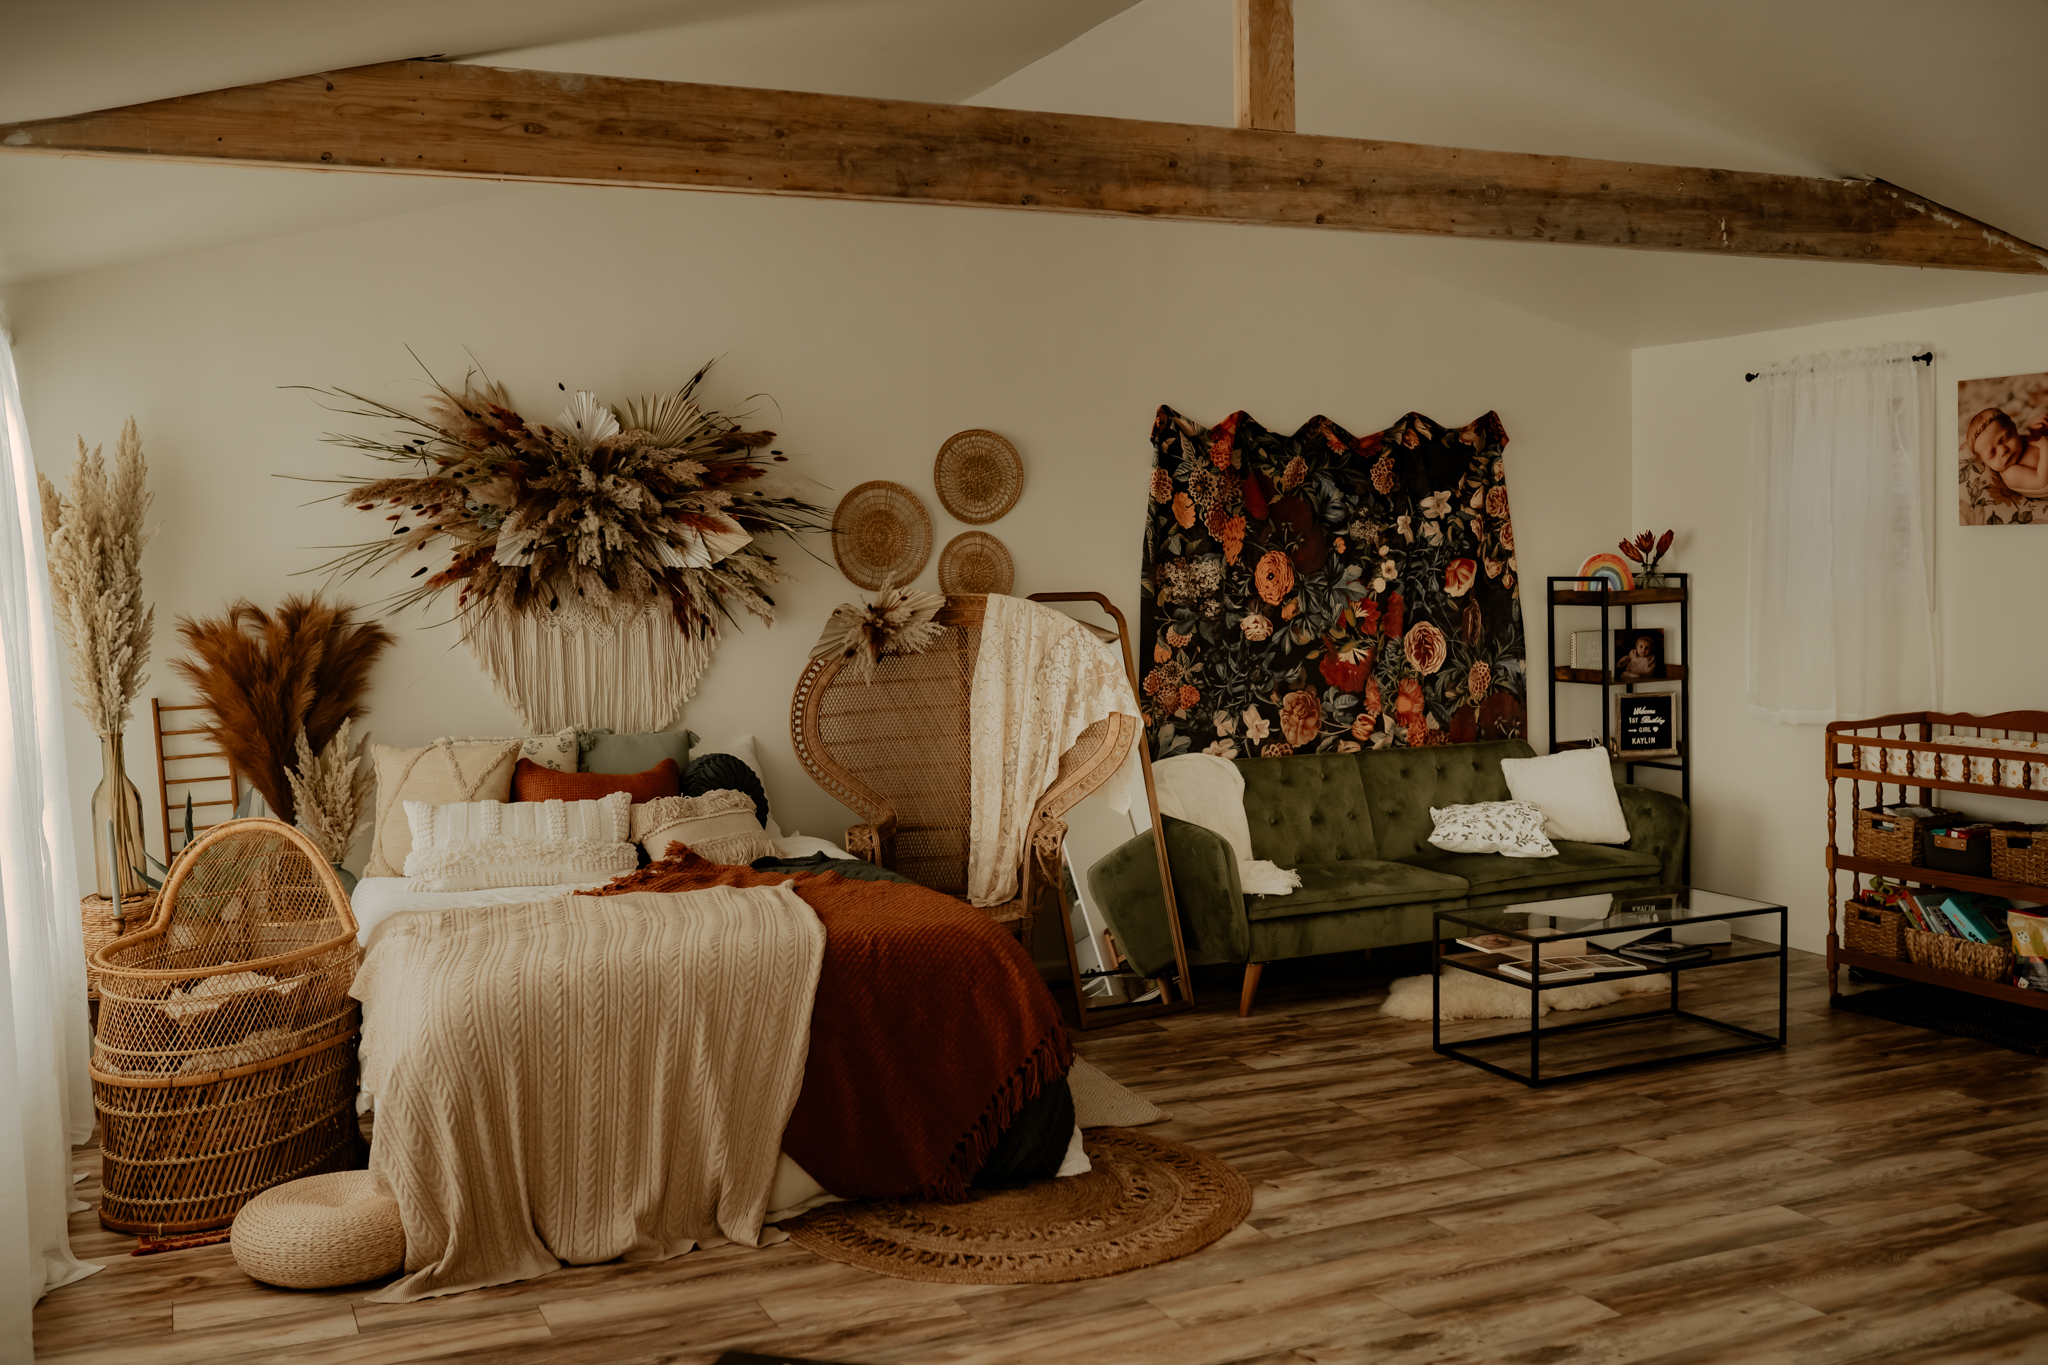 Dover PA Photograpy Studio featuring a boho li festyle bed